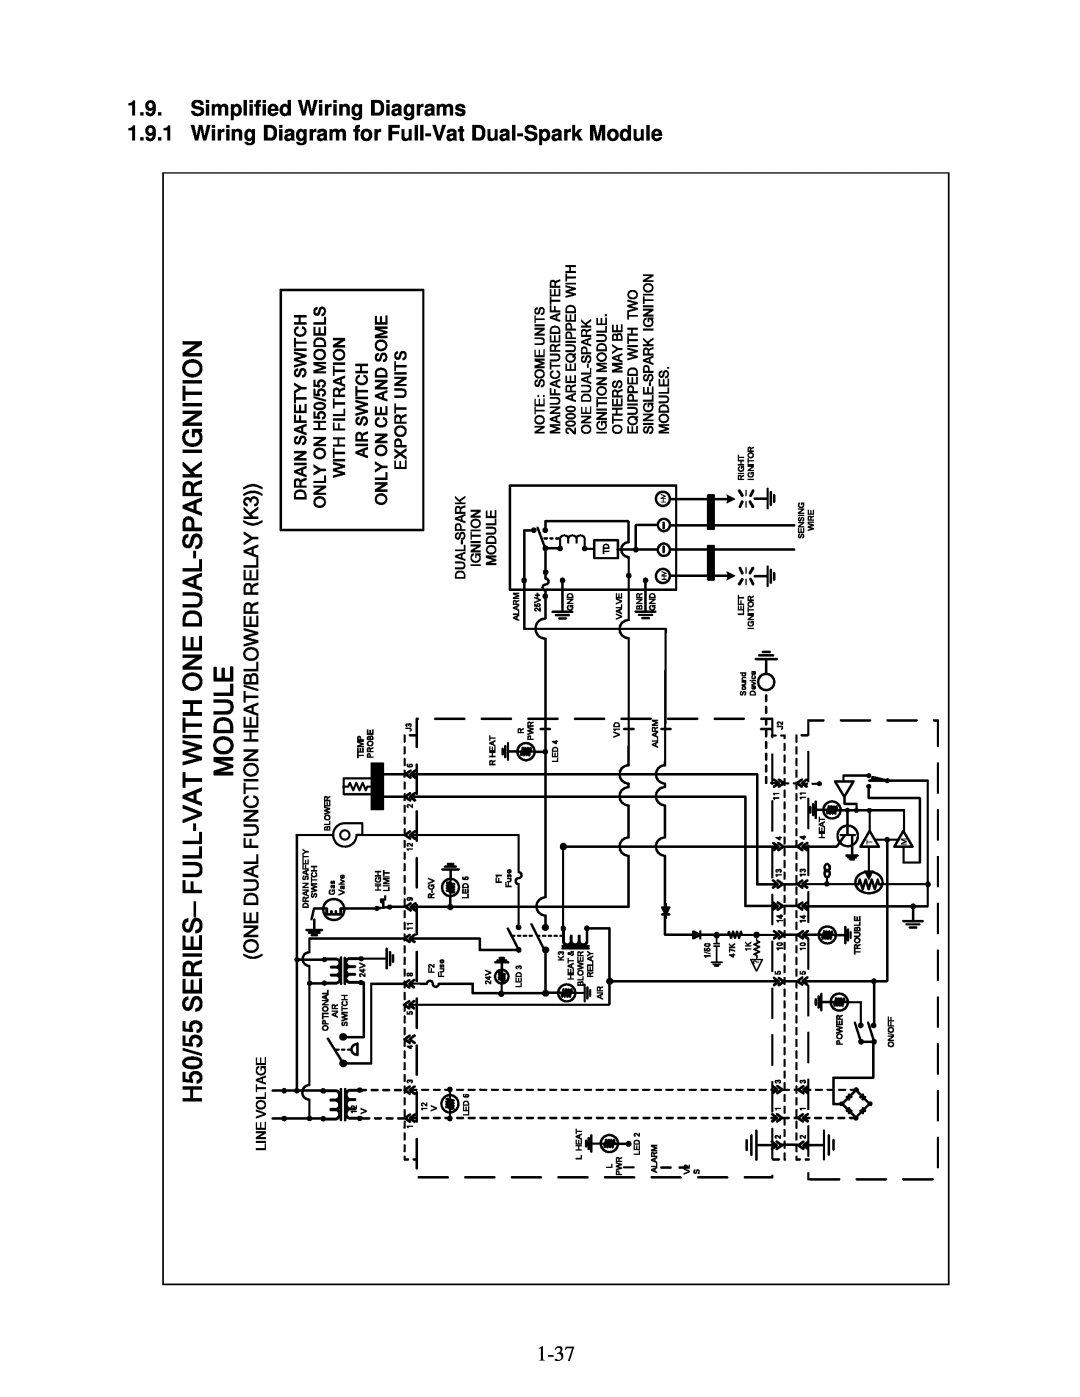 Frymaster H50 Module, 1.9.1, Wiring Diagram for Full-Vat, Simplified Wiring Diagrams, Dual, Spark, Only On Ce And Some 